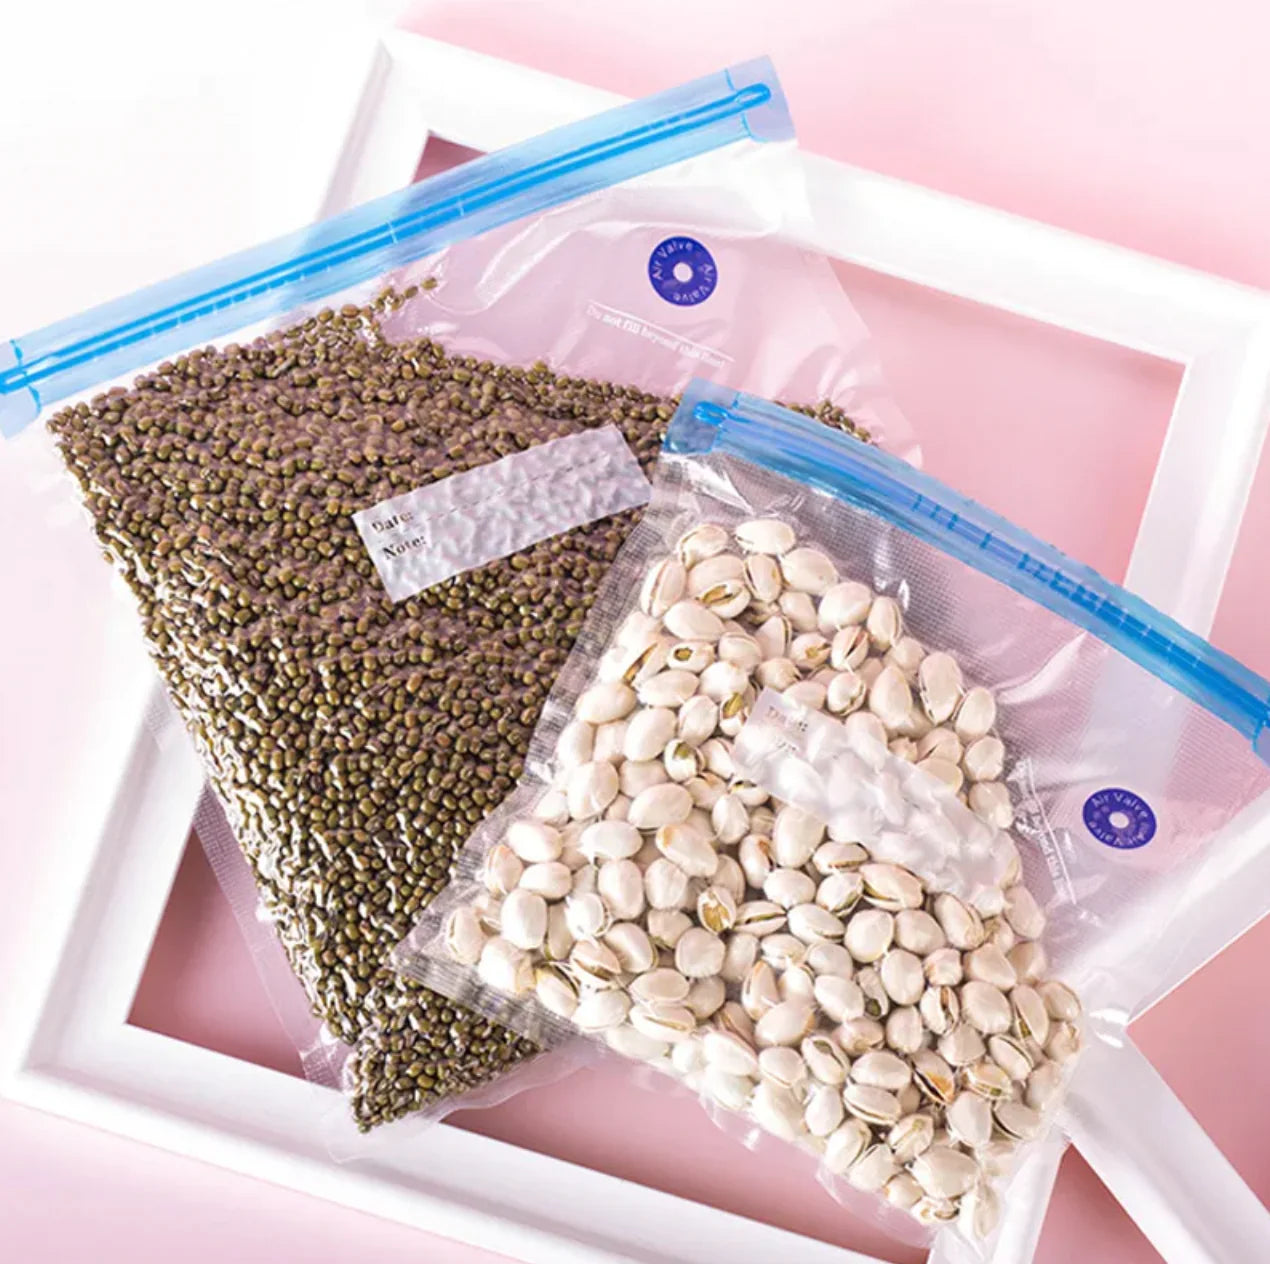 Lock in the Freshness with Our Reusable Vacuum Seal Food Storage Bags